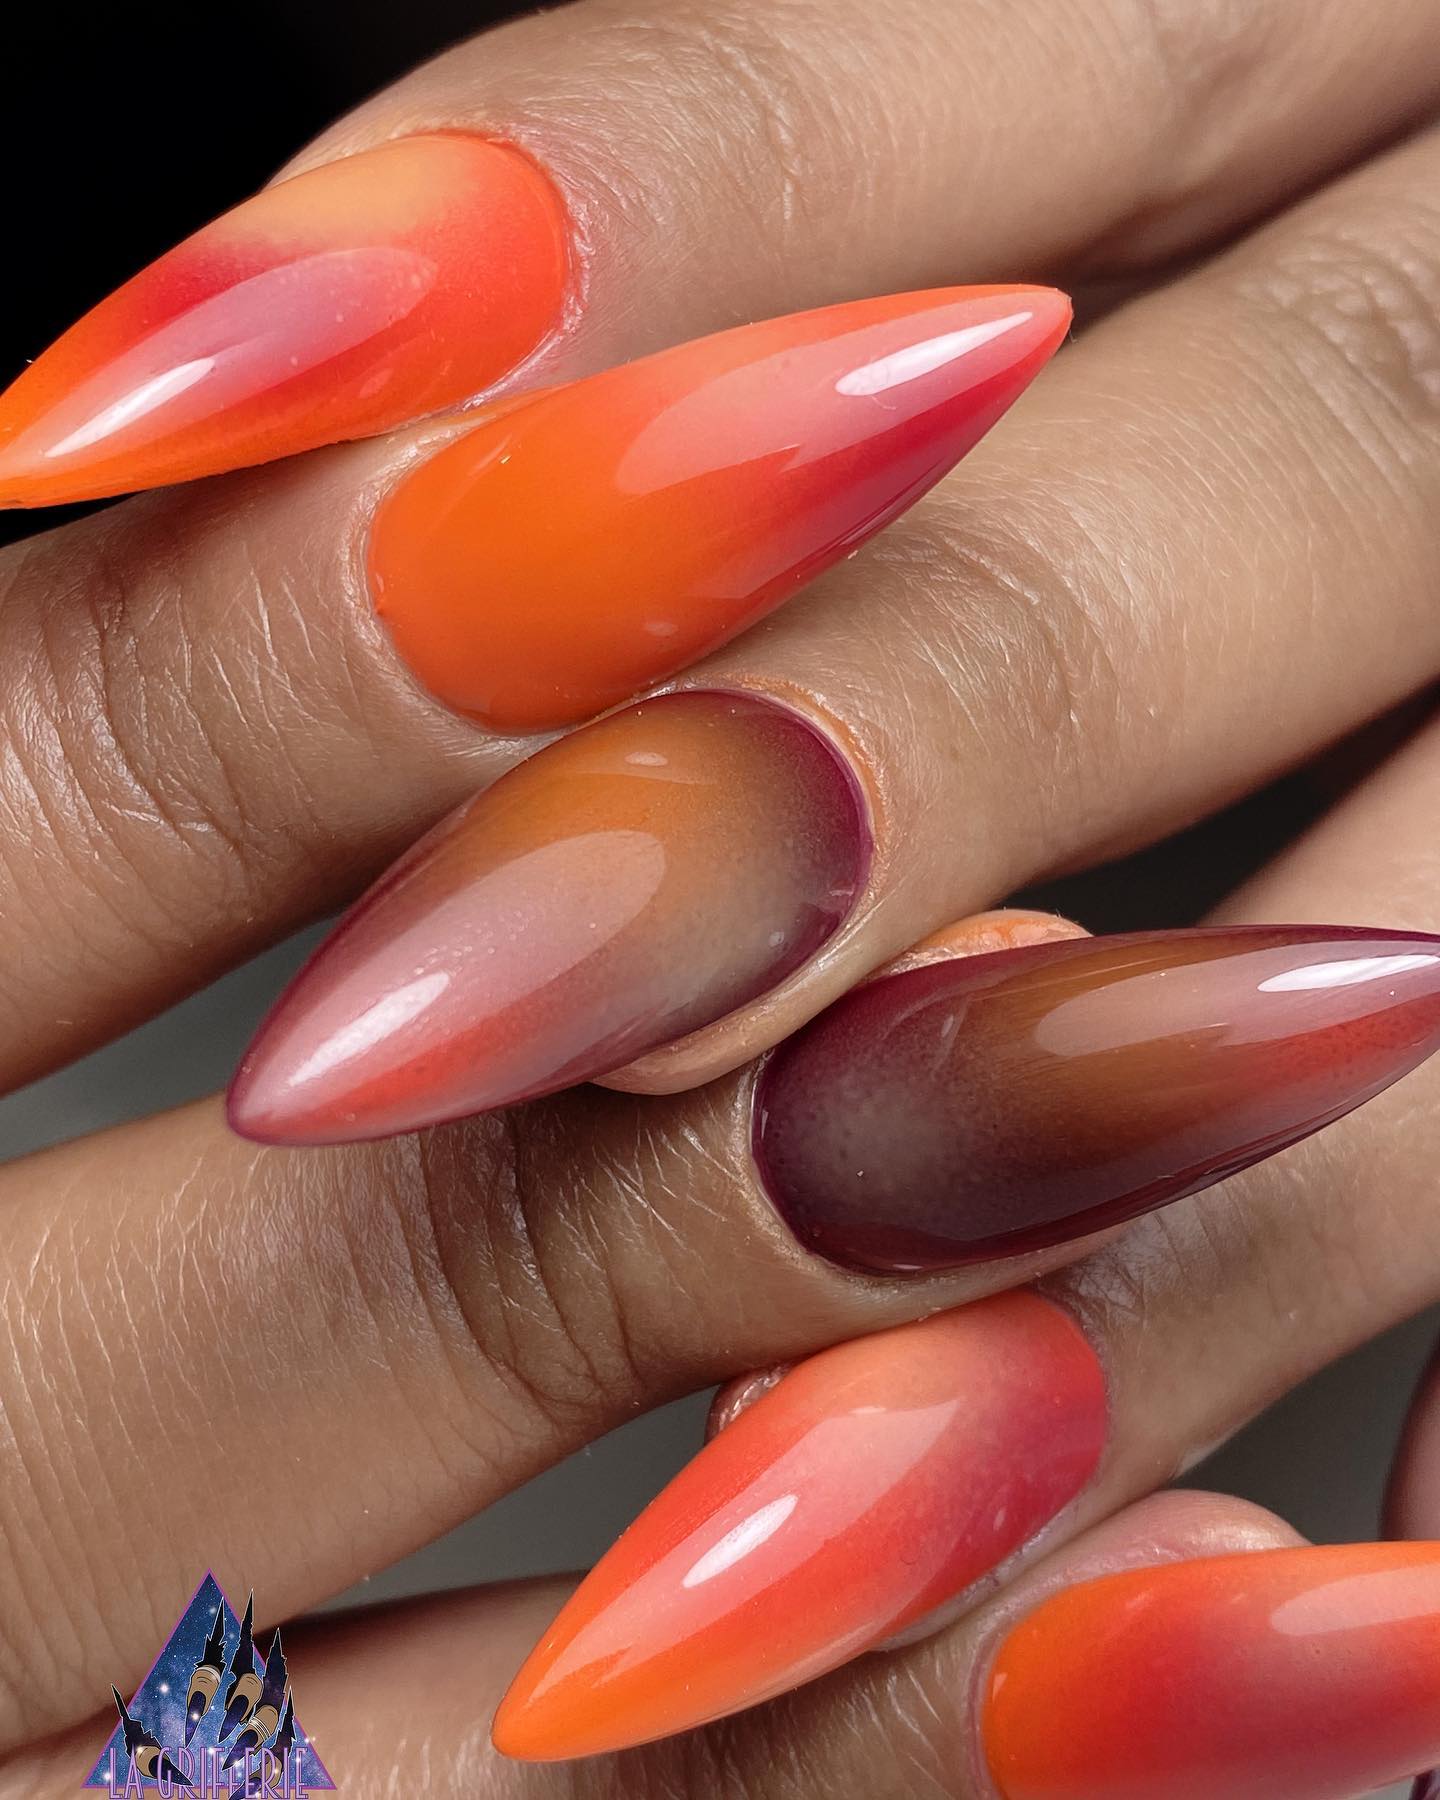 Orange stiletto nails are a fun way to show off your individuality! You can wear them on their own, or pair them with another color like purple or red like the one above. The possibilities are endless!